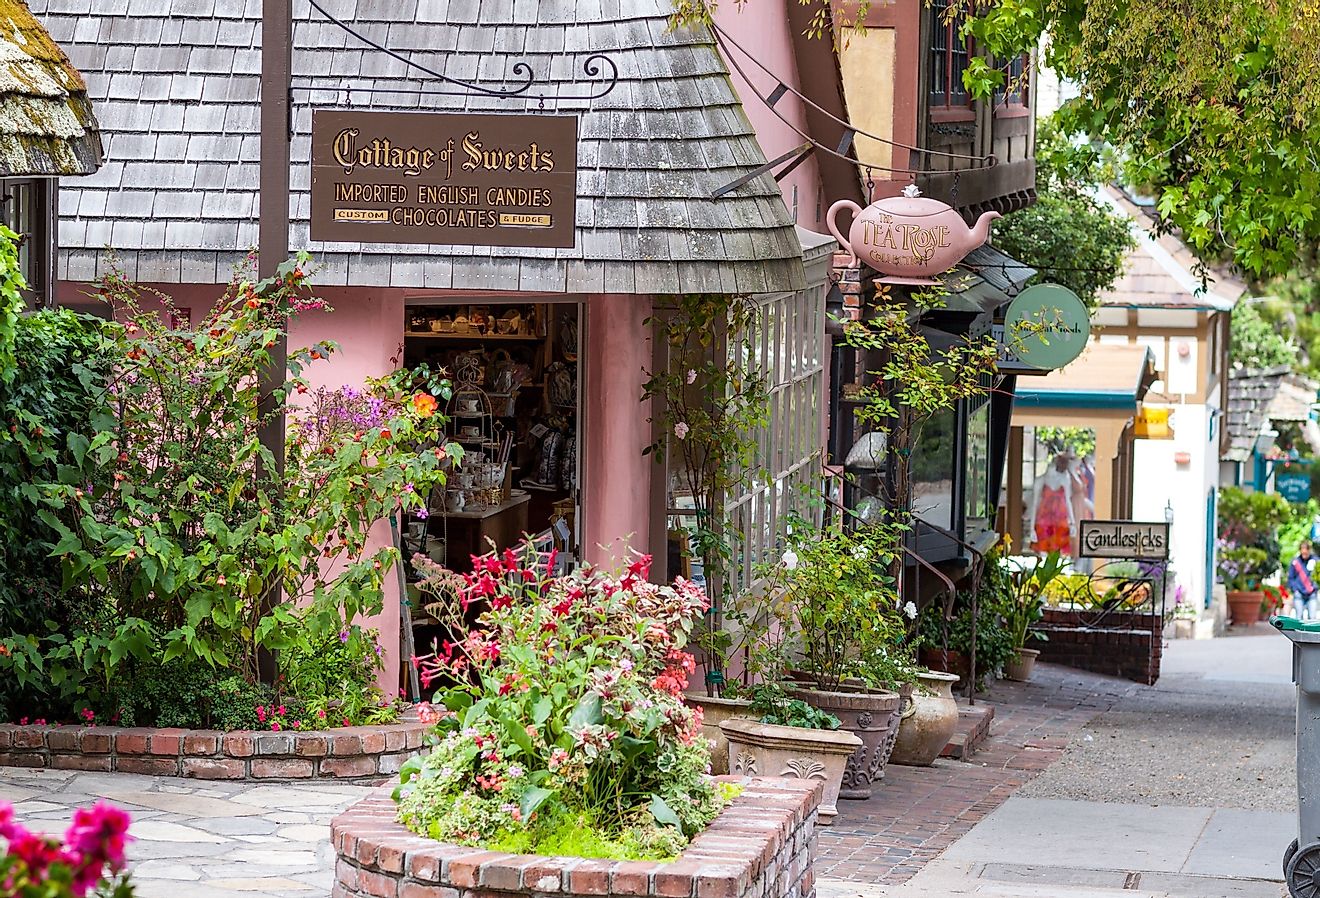 Quaint ivy-covered shops in Carmel-by-the-Sea. Image credit J Wendy Baker via Shutterstock.